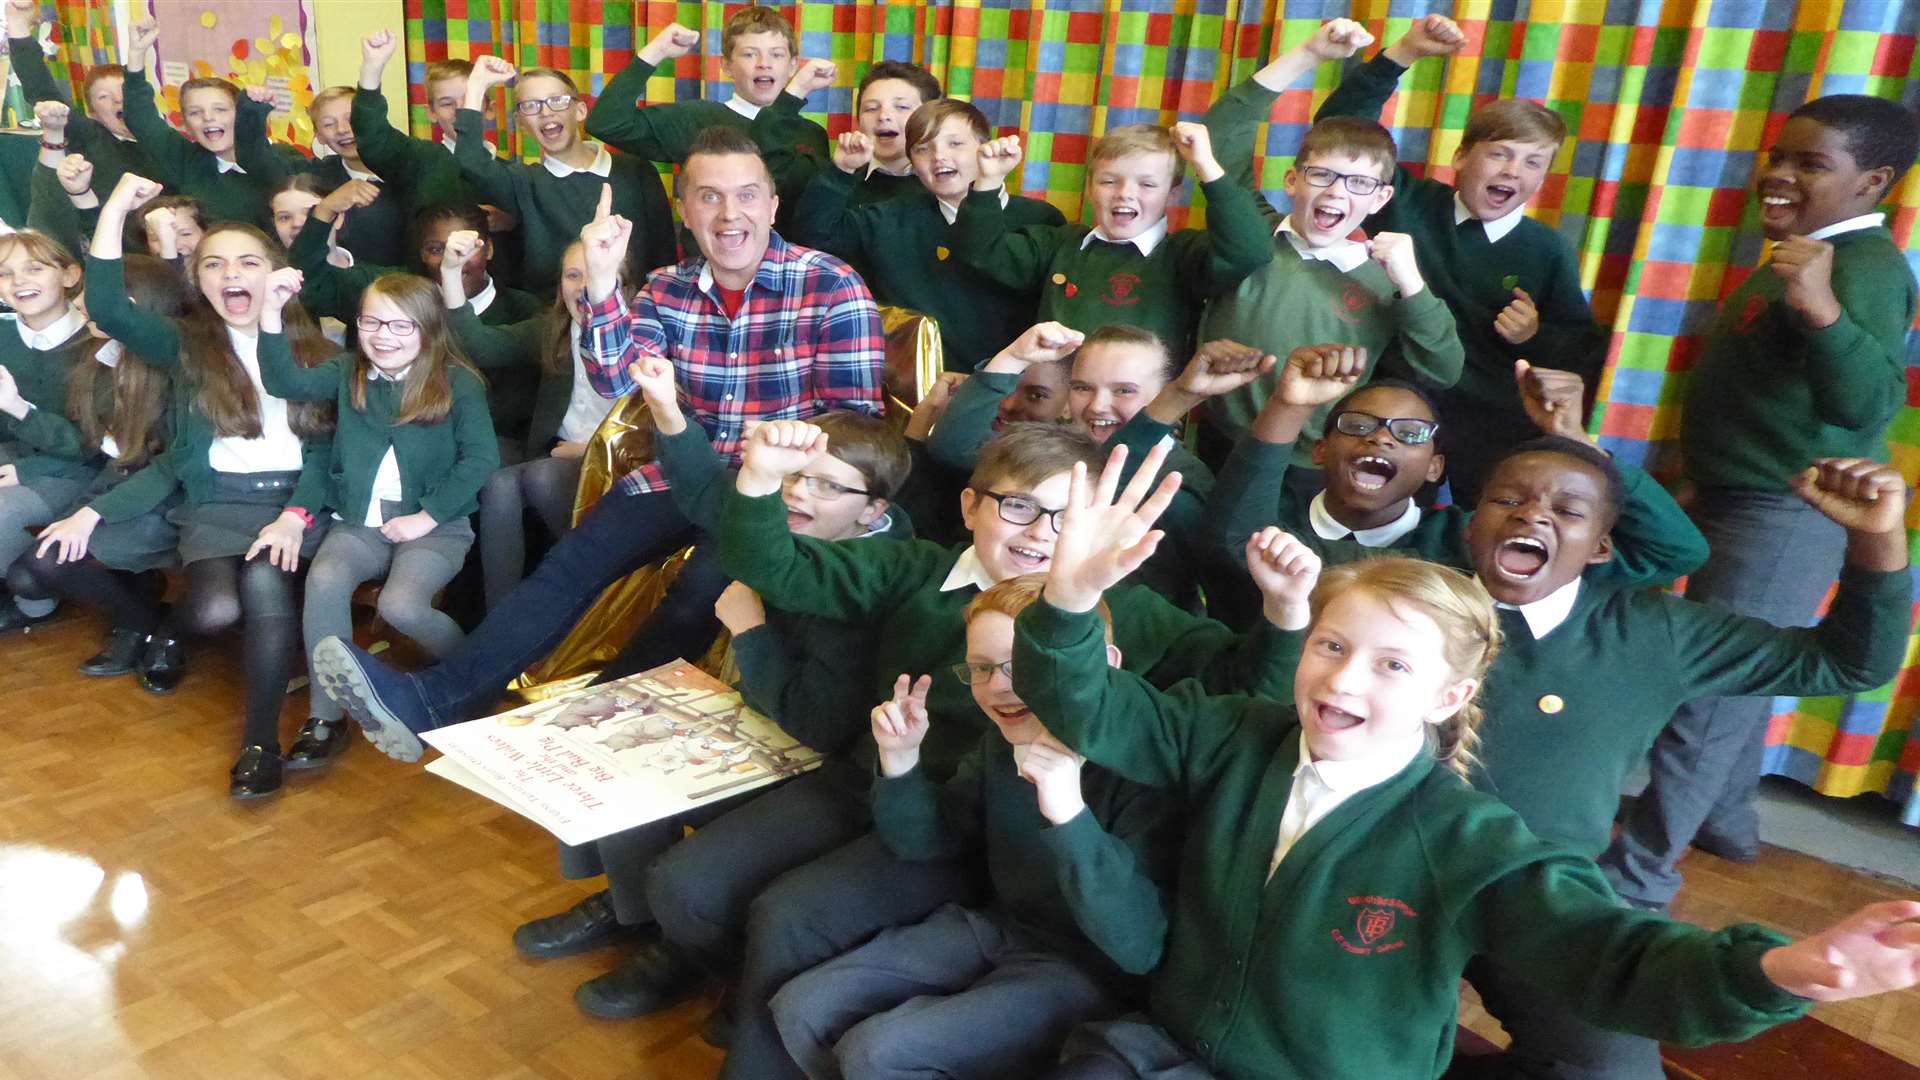 Phil Gallagher from the Mister Maker CBeebies TV show reads a story time session with Dunston Class at Bapchild & Tonge Primary School.